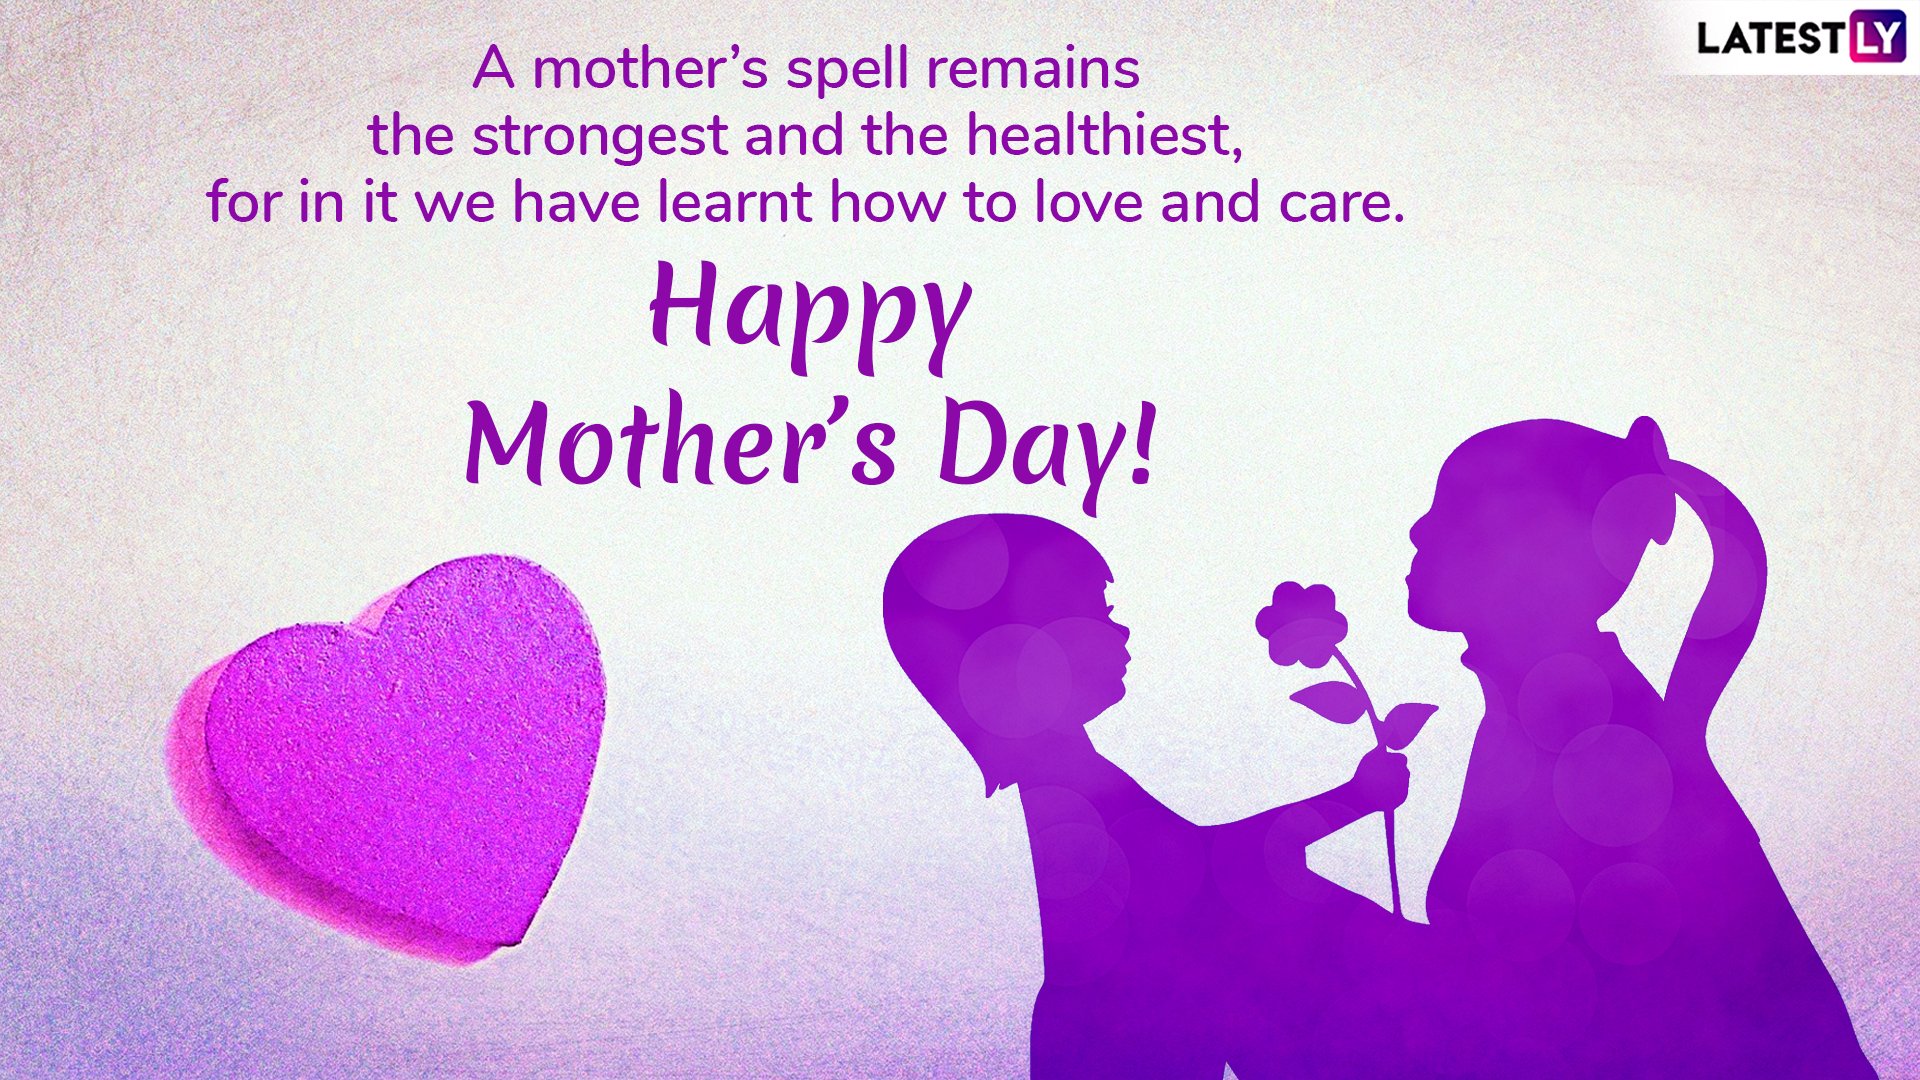 Happy Mother's Day Greetings Wallpapers Wallpaper Cave